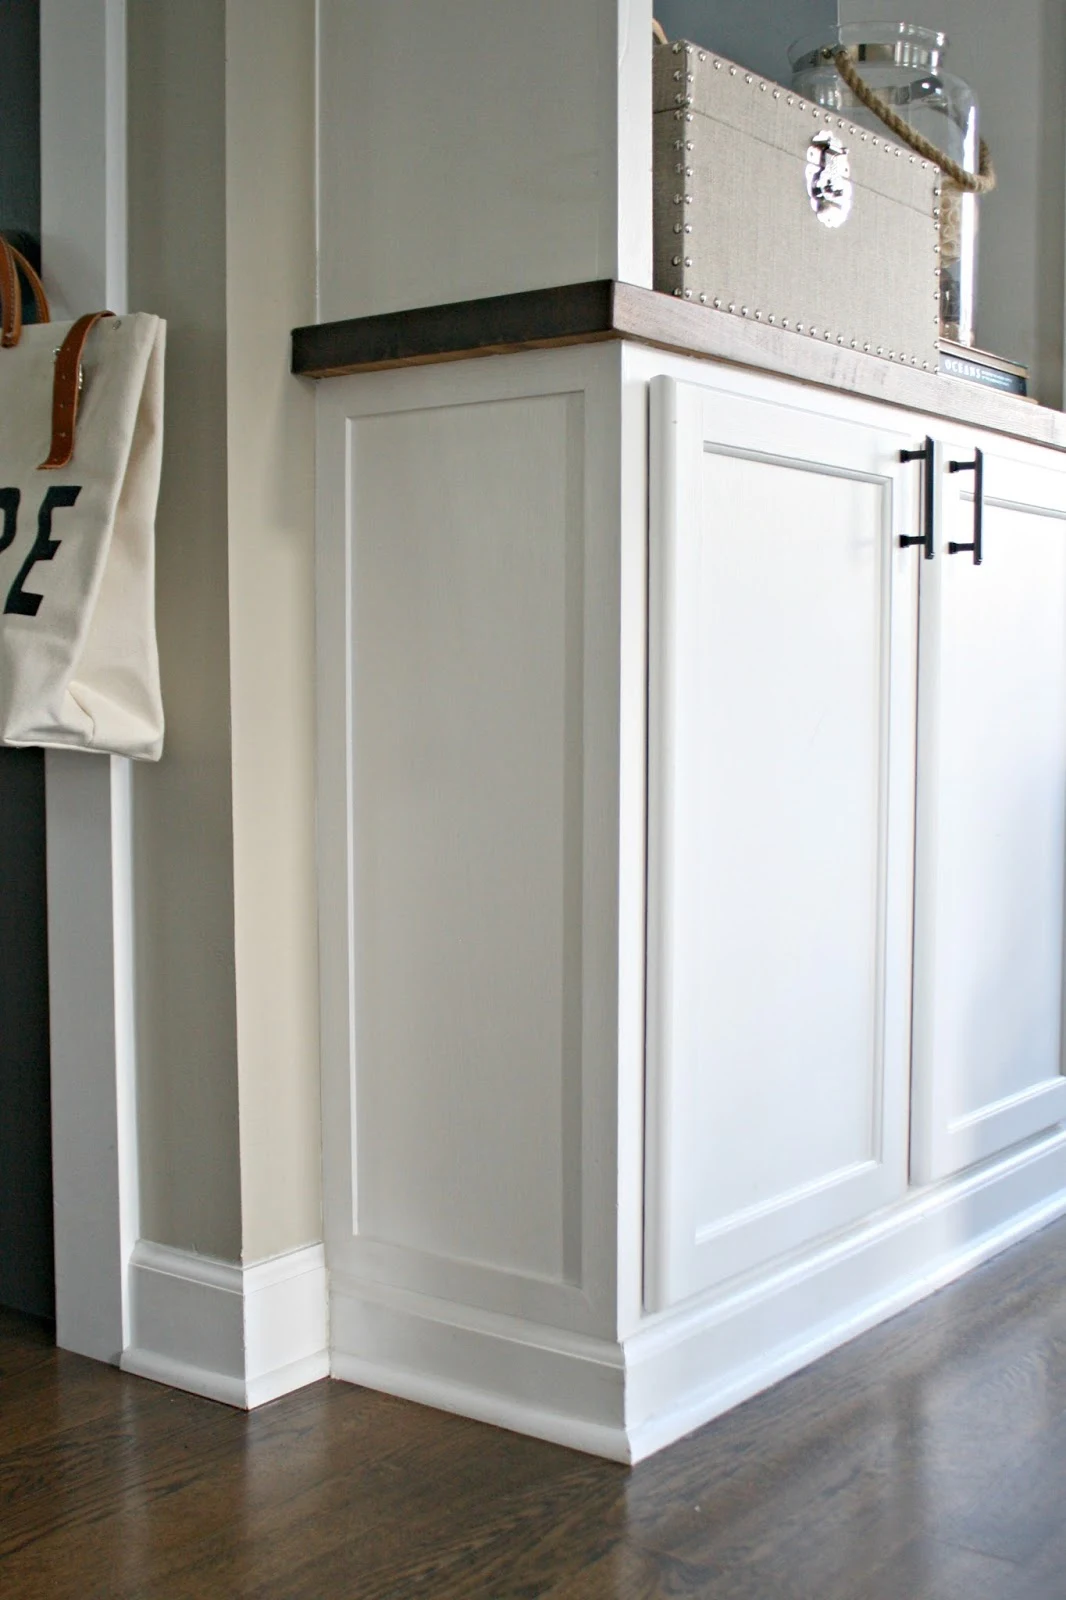 Using kitchen cabinets to build a bookcase